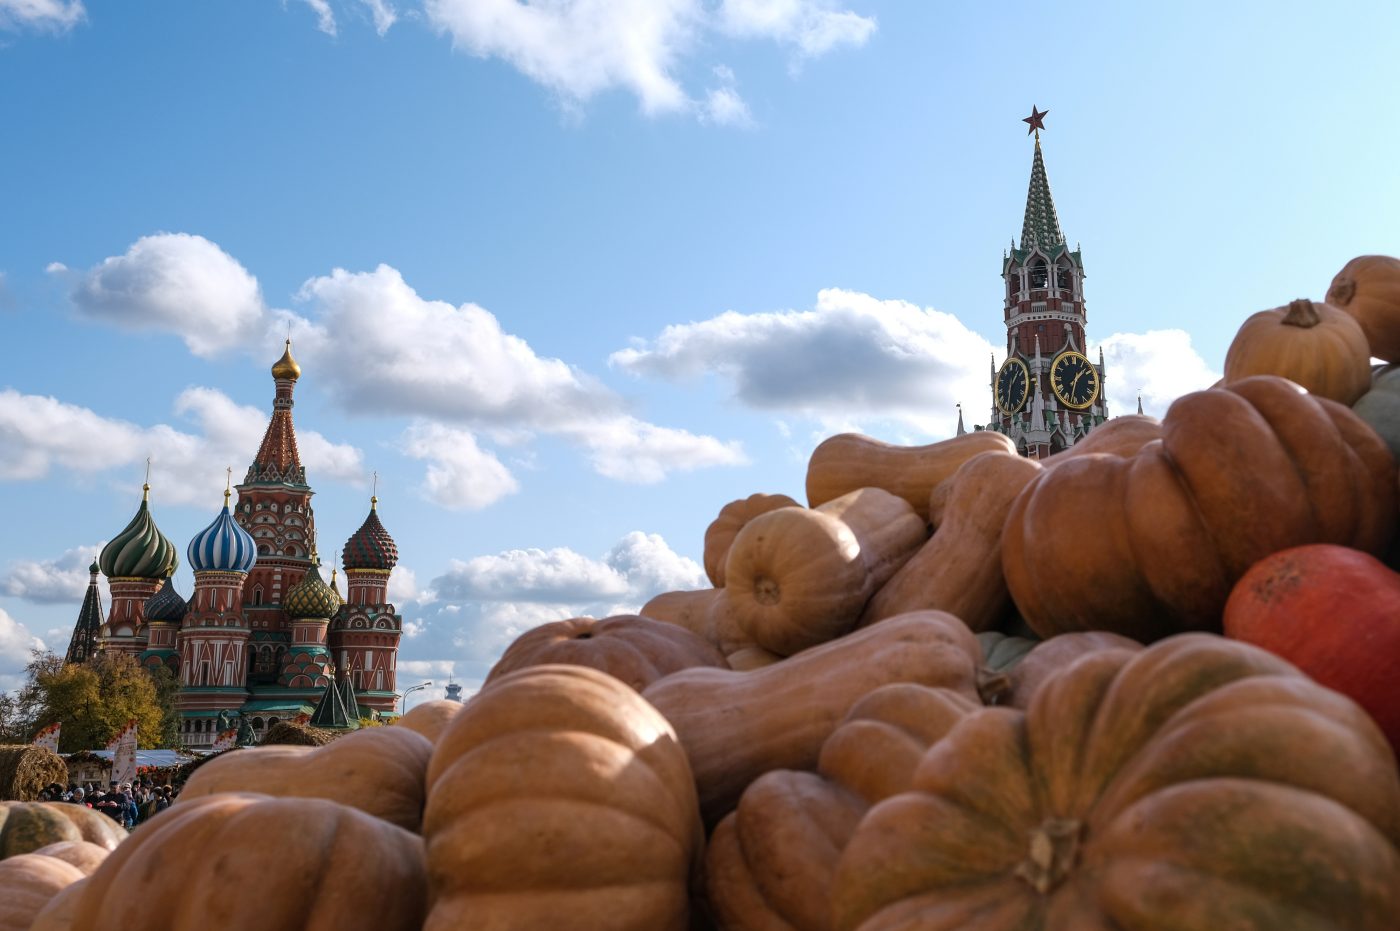 Photo: Pumpkins are pictured during the Golden Autumn festival at the Red Square, as the Spasskaya tower of the Kremlin and St. Basil's Cathedral are seen in the background, in Moscow, Russia October 8, 2019. REUTERS/Evgenia Novozhenina